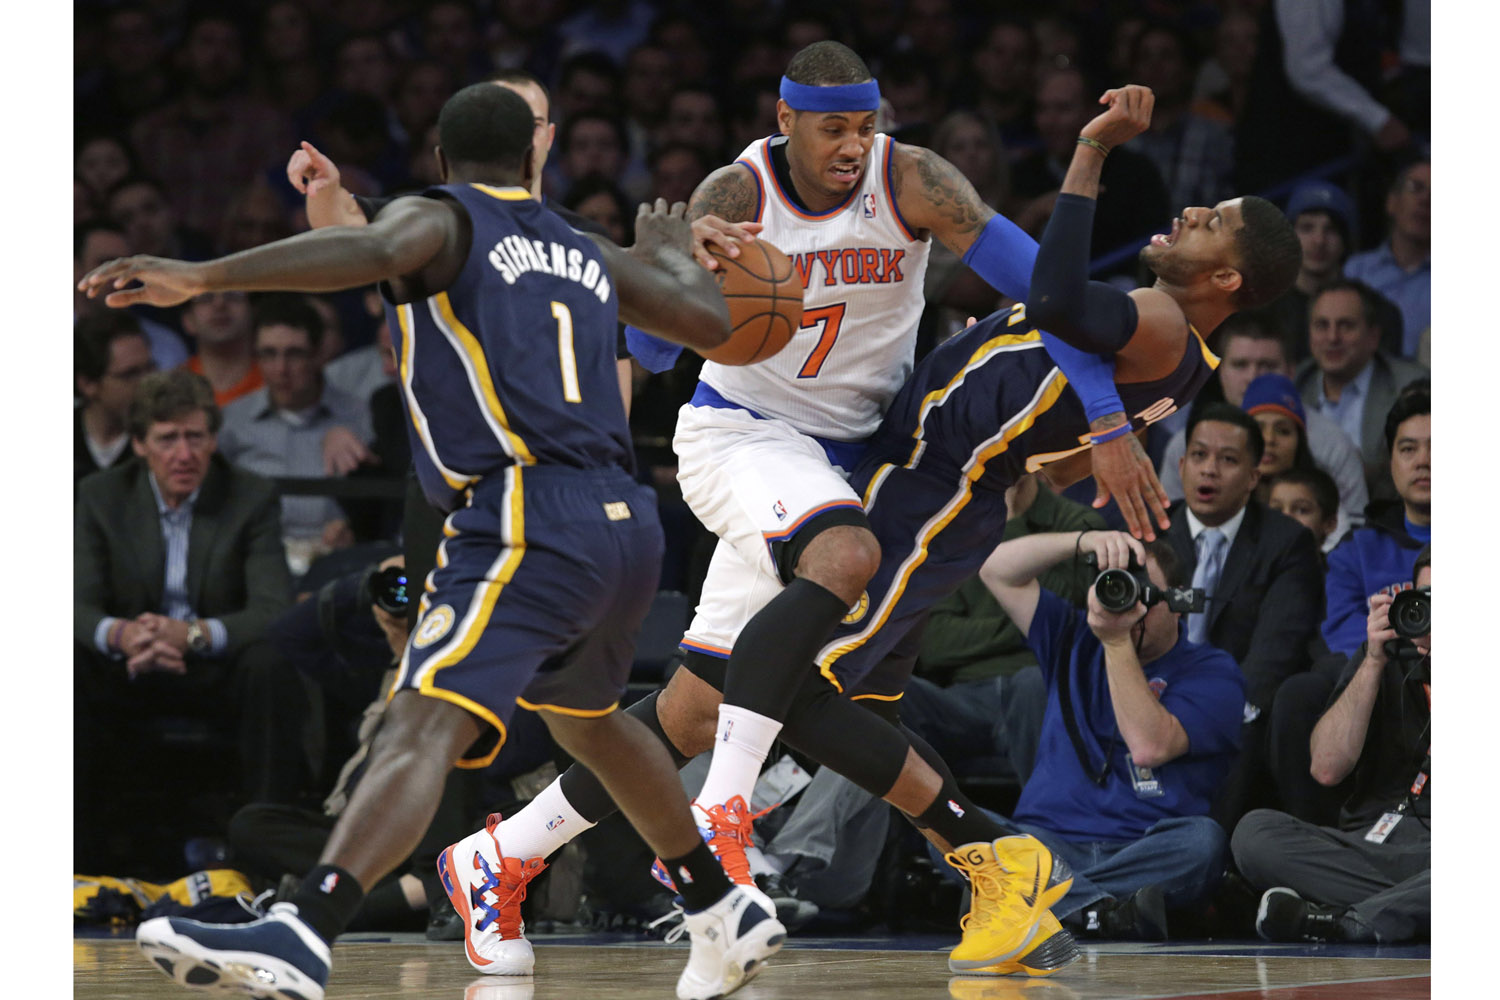 Nov. 20, 2013. New York Knicks small forward Carmelo Anthony (7) sends Indiana Pacers forward Paul George (24) to the floor in the first half of their NBA basketball game at Madison Square Garden in New York.